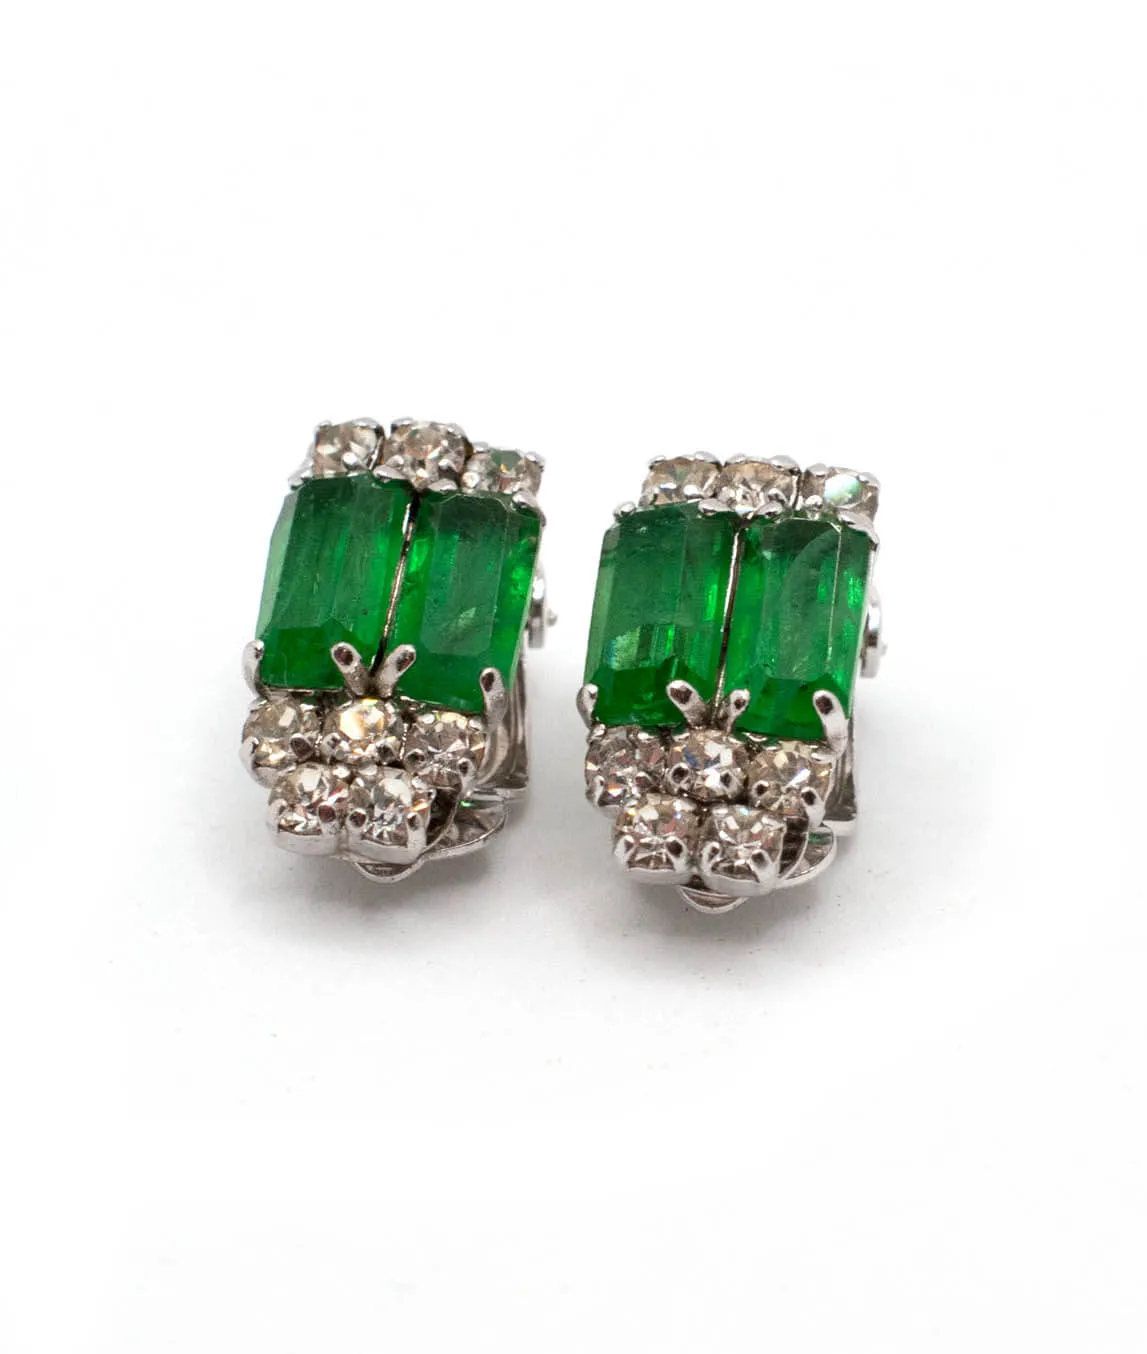 Christian Dior flawed emerald green and clear paste earrings 1970s